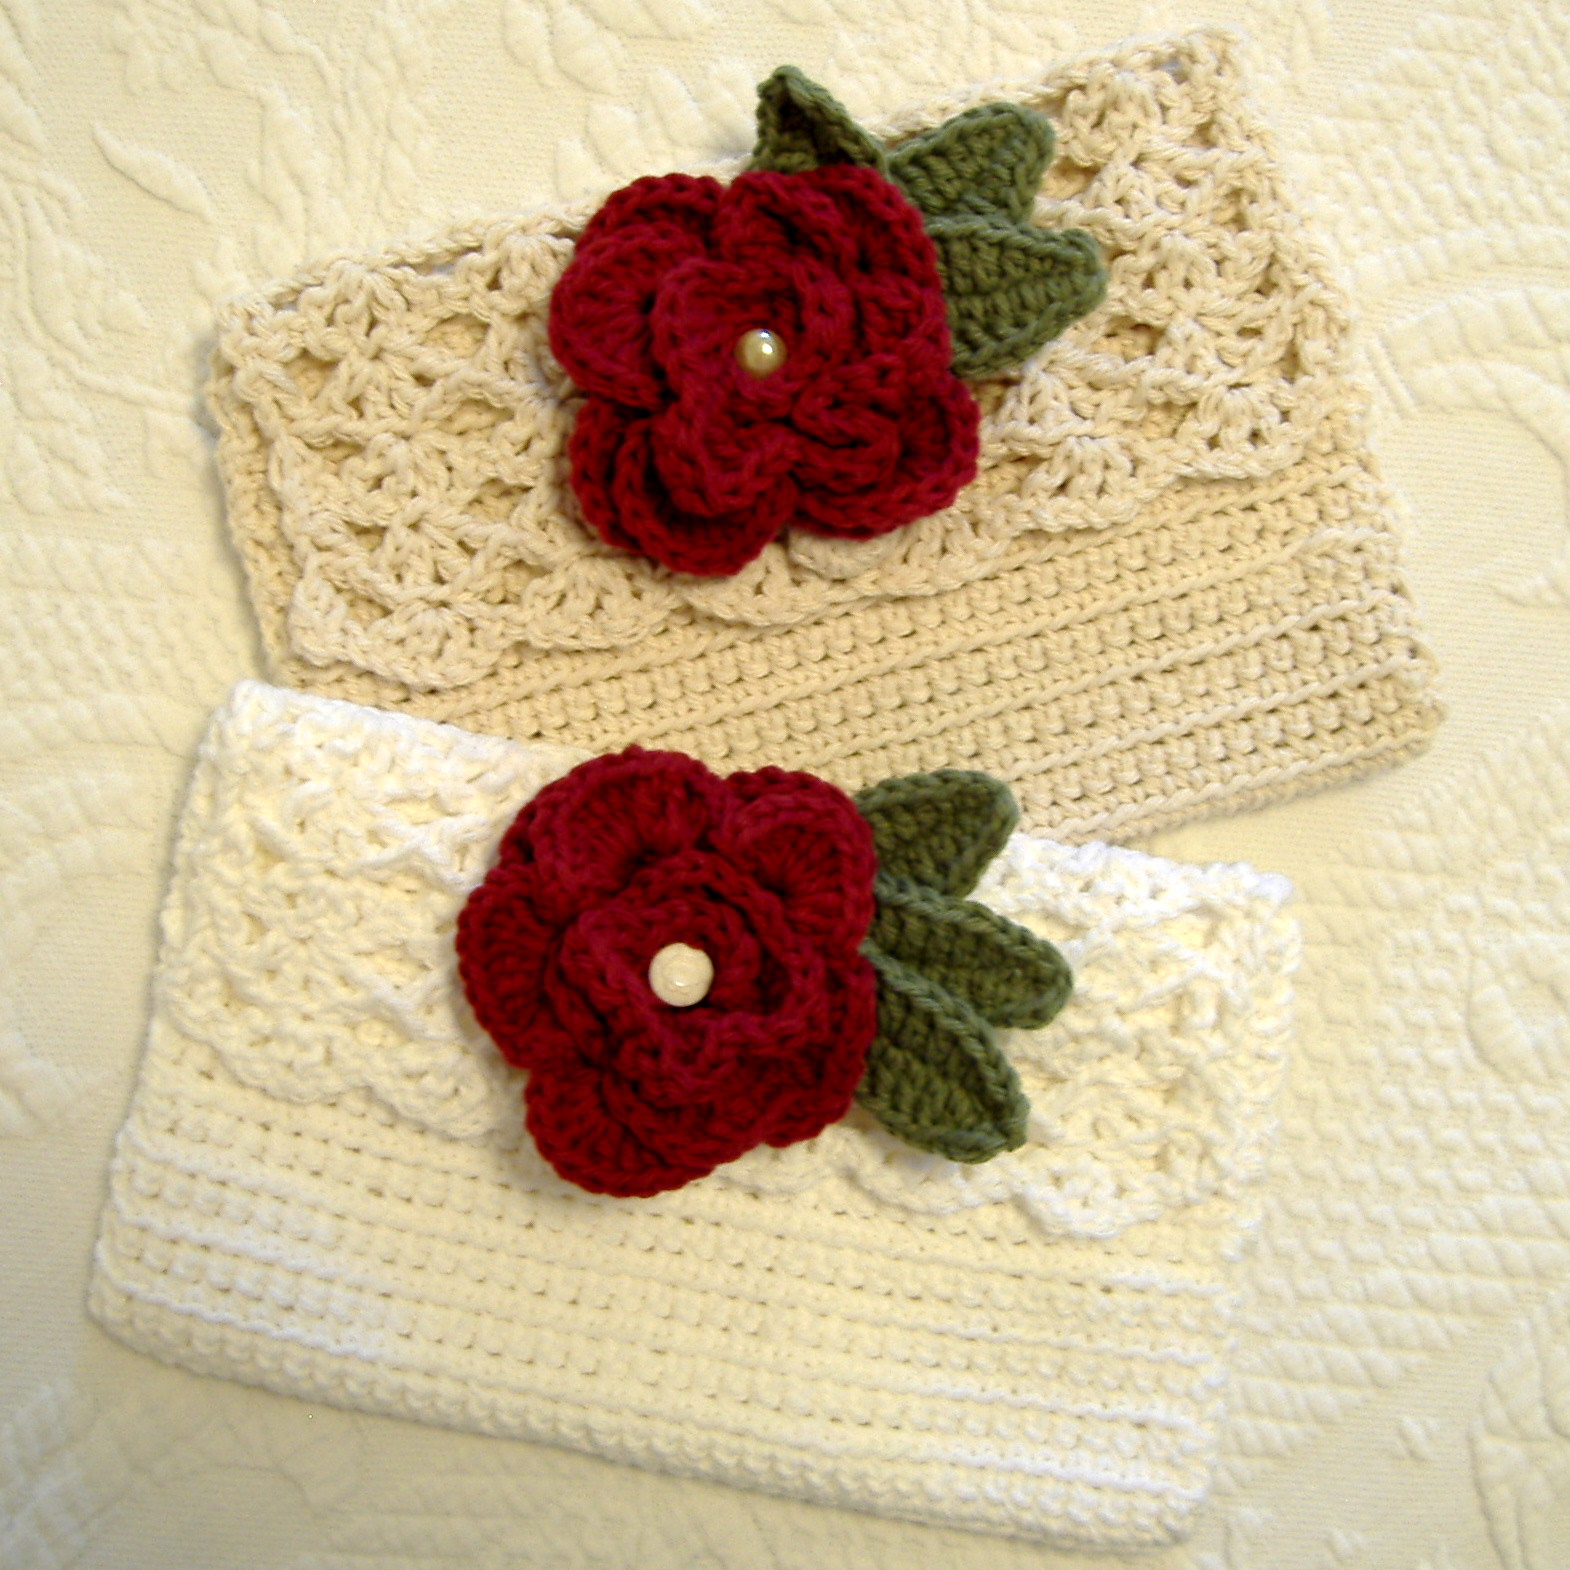 Free Crochet Pattern - Change Purse from the Purses and bags Free